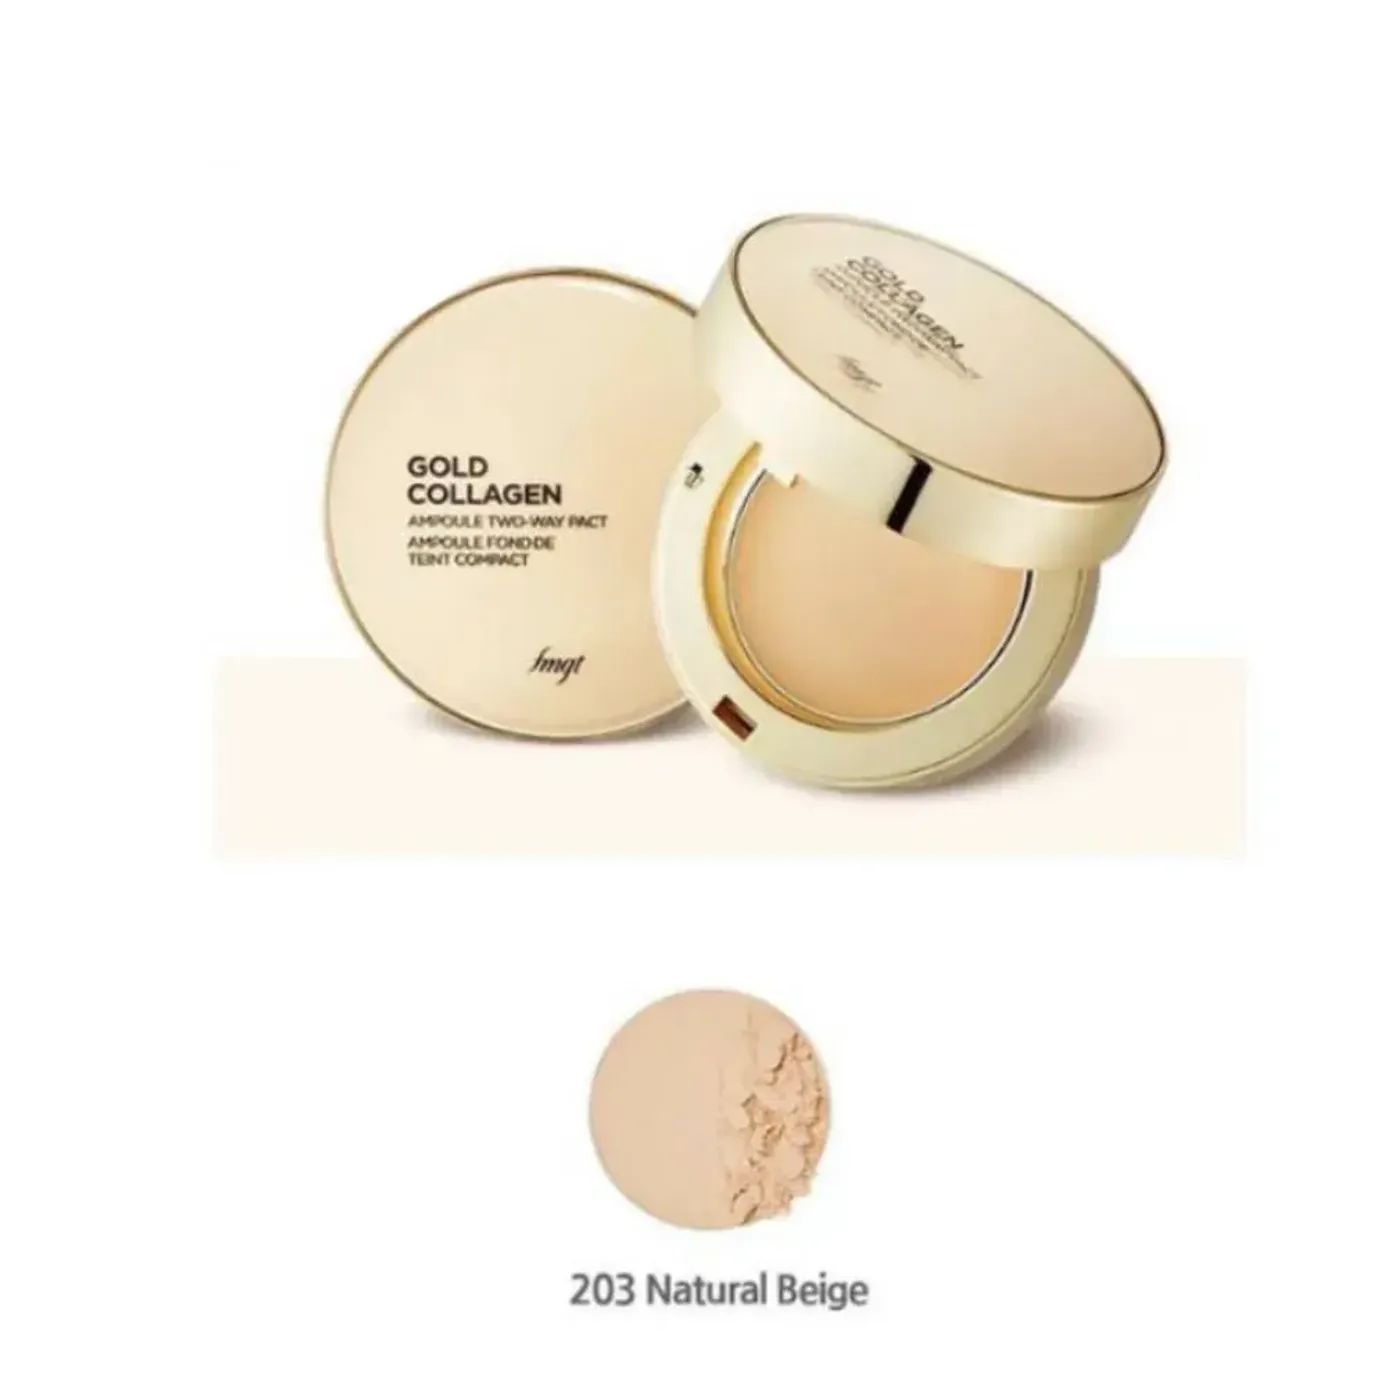  [Fmgt] Phấn Nền Che Khuyết Điểm THE FACE SHOP Gold Collagen Ampoule Two-Way Pact Spf30 Pa+++ 